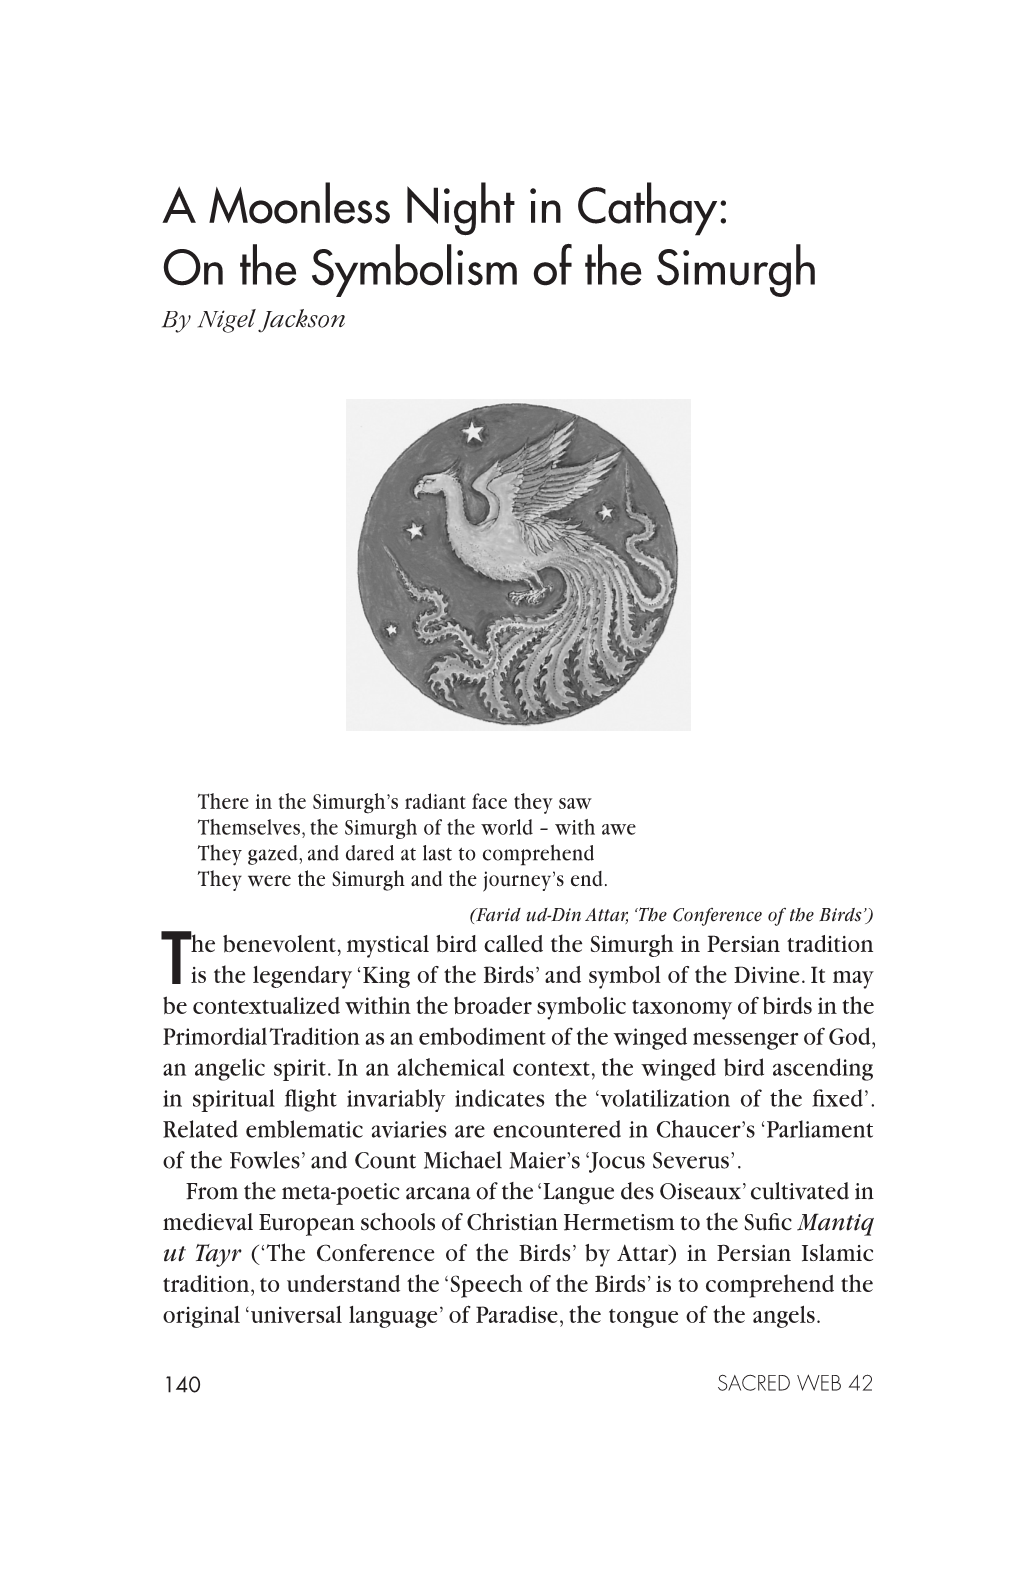 A Moonless Night in Cathay: on the Symbolism of the Simurgh by Nigel Jackson